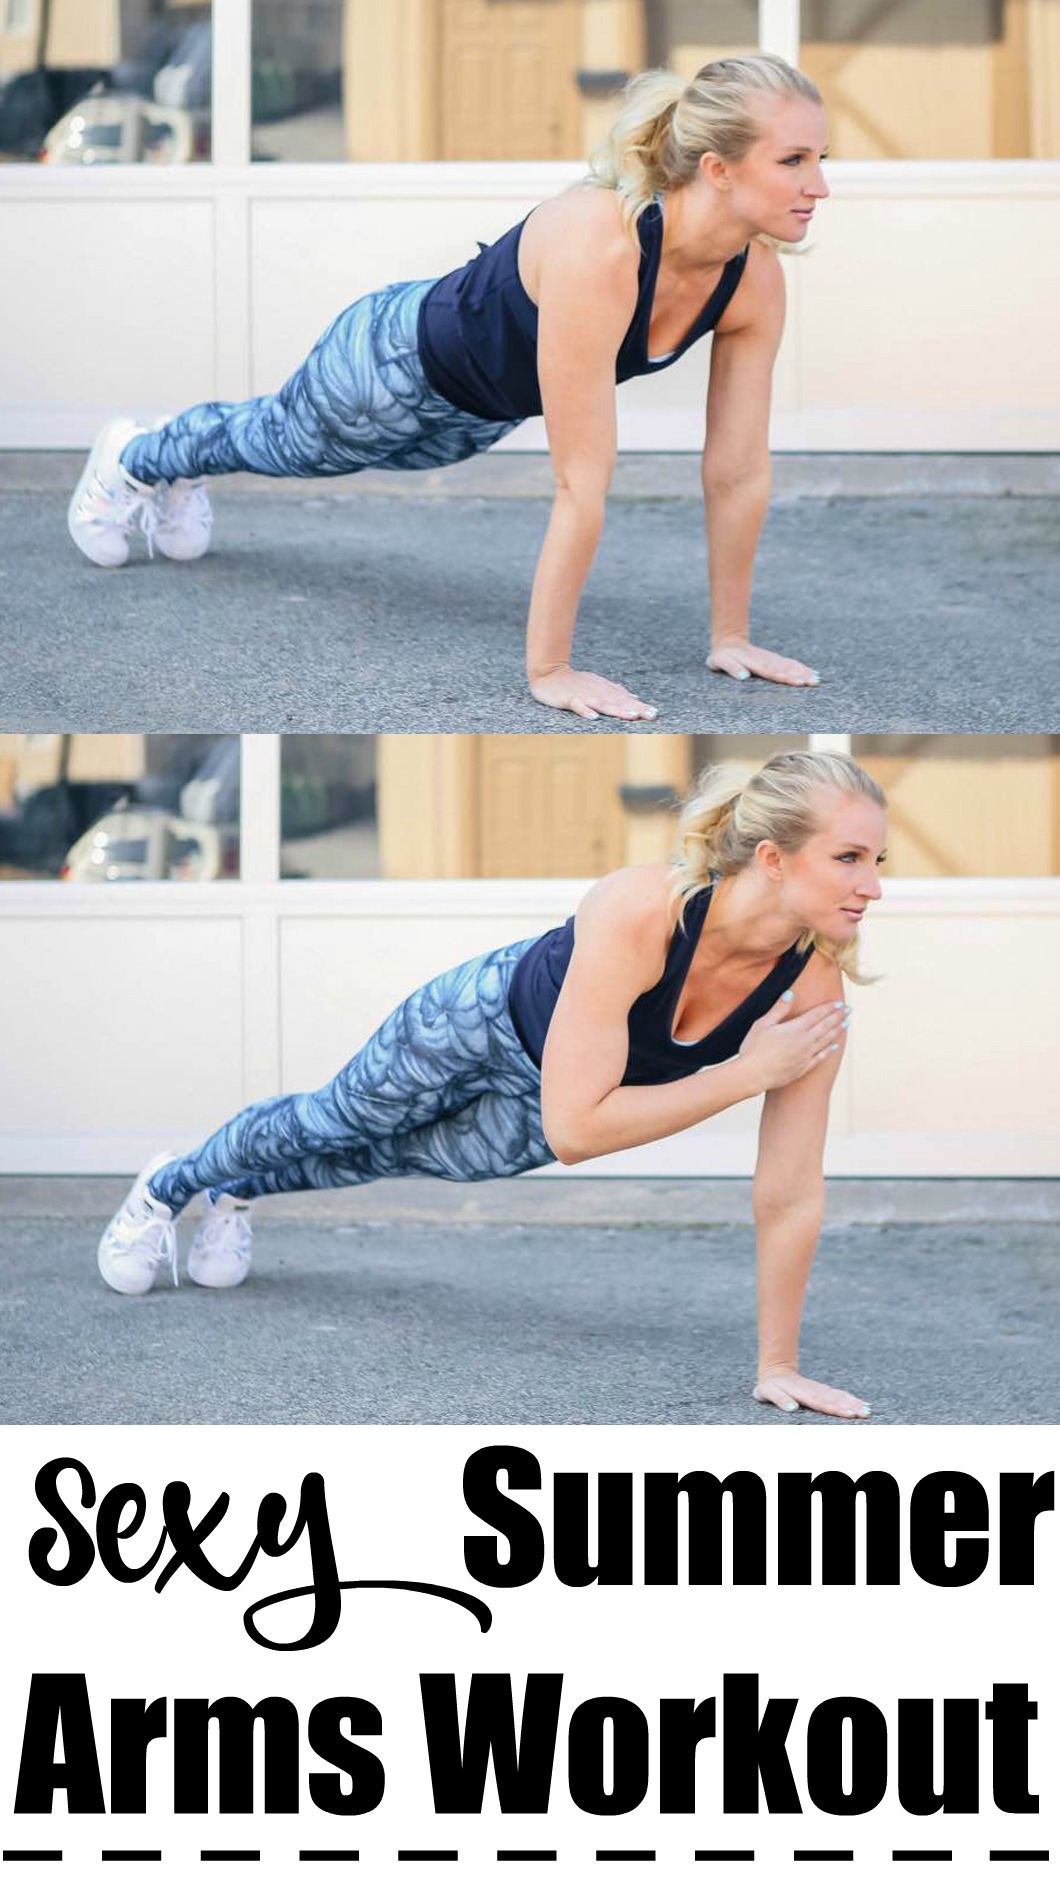 Sexy Summer Arms Workout For Women with luluLemon by fitness blogger Jessica from Happily Hughes